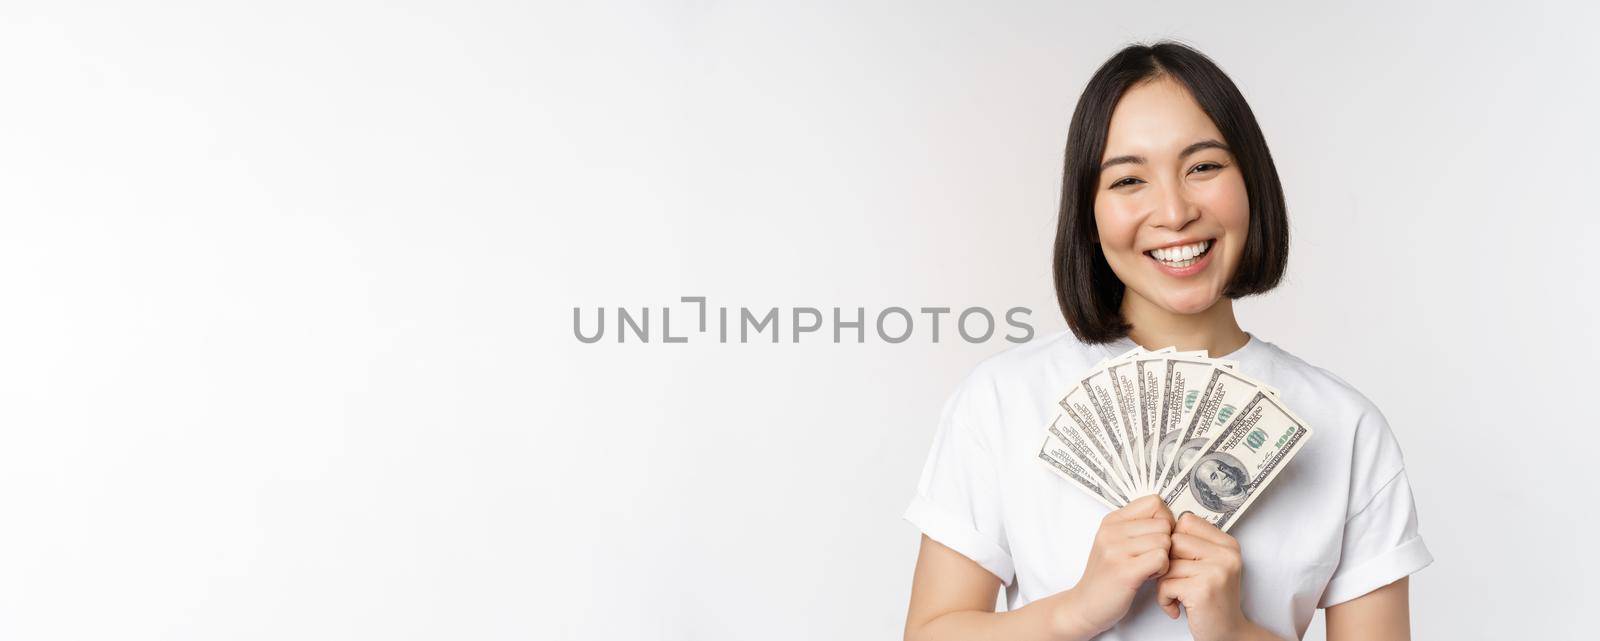 Portrait of smiling asian woman holding dollars money, concept of microcredit, finance and cash, standing over white background.